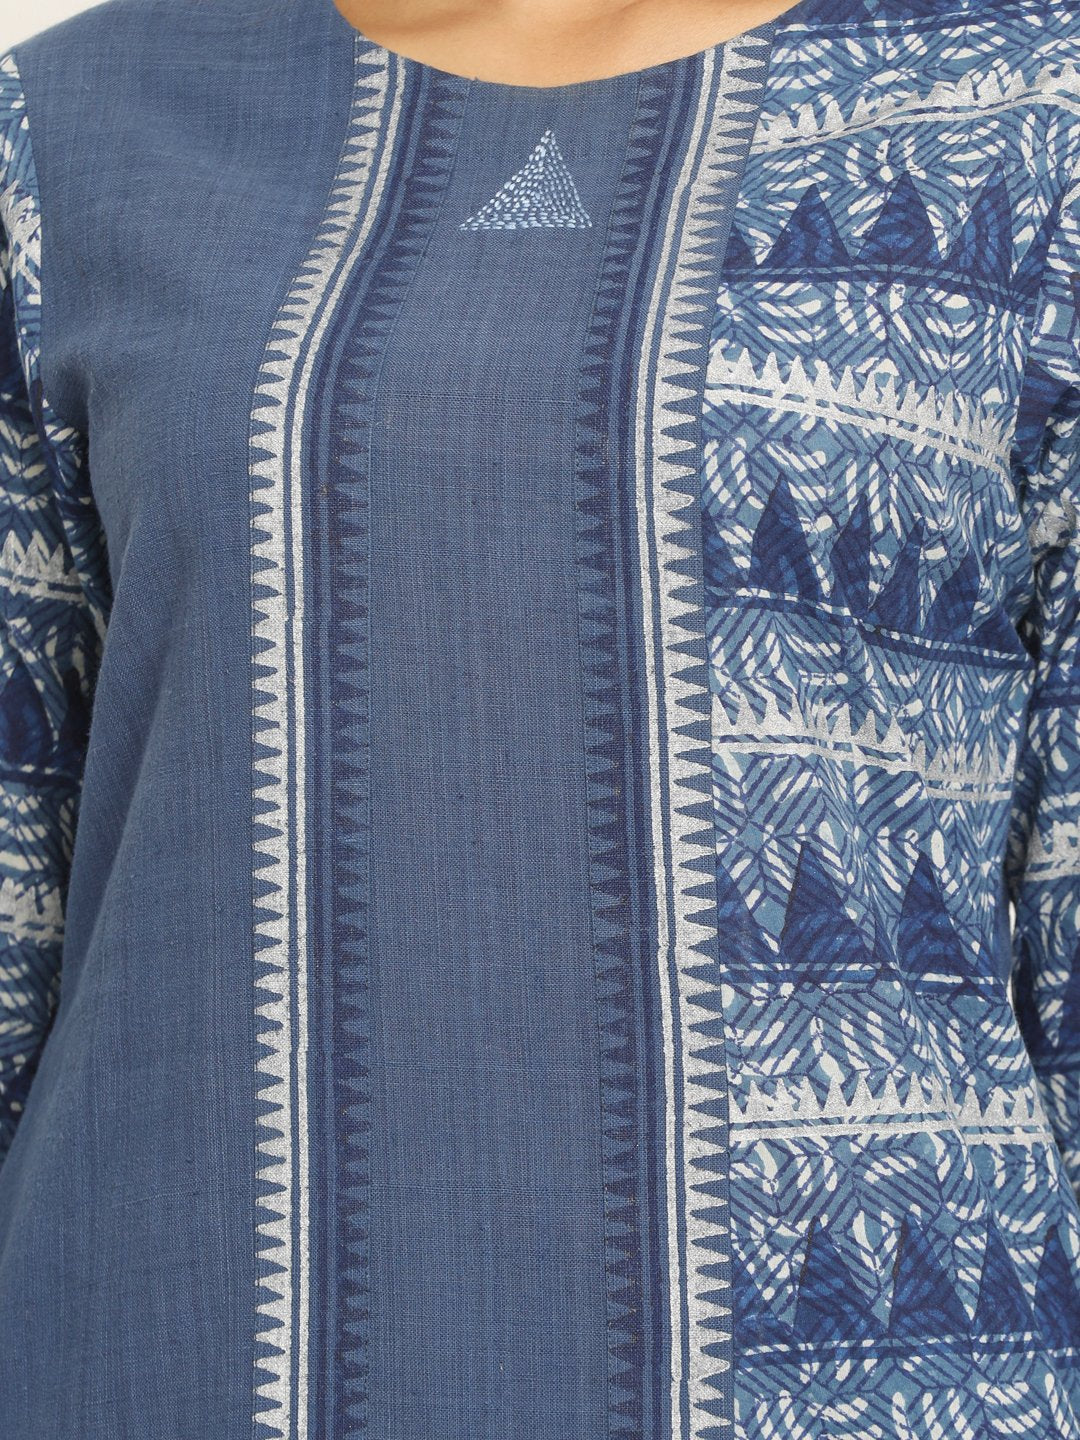 Block Printed and Embroidered Assymetrical Navy Blue Kurta